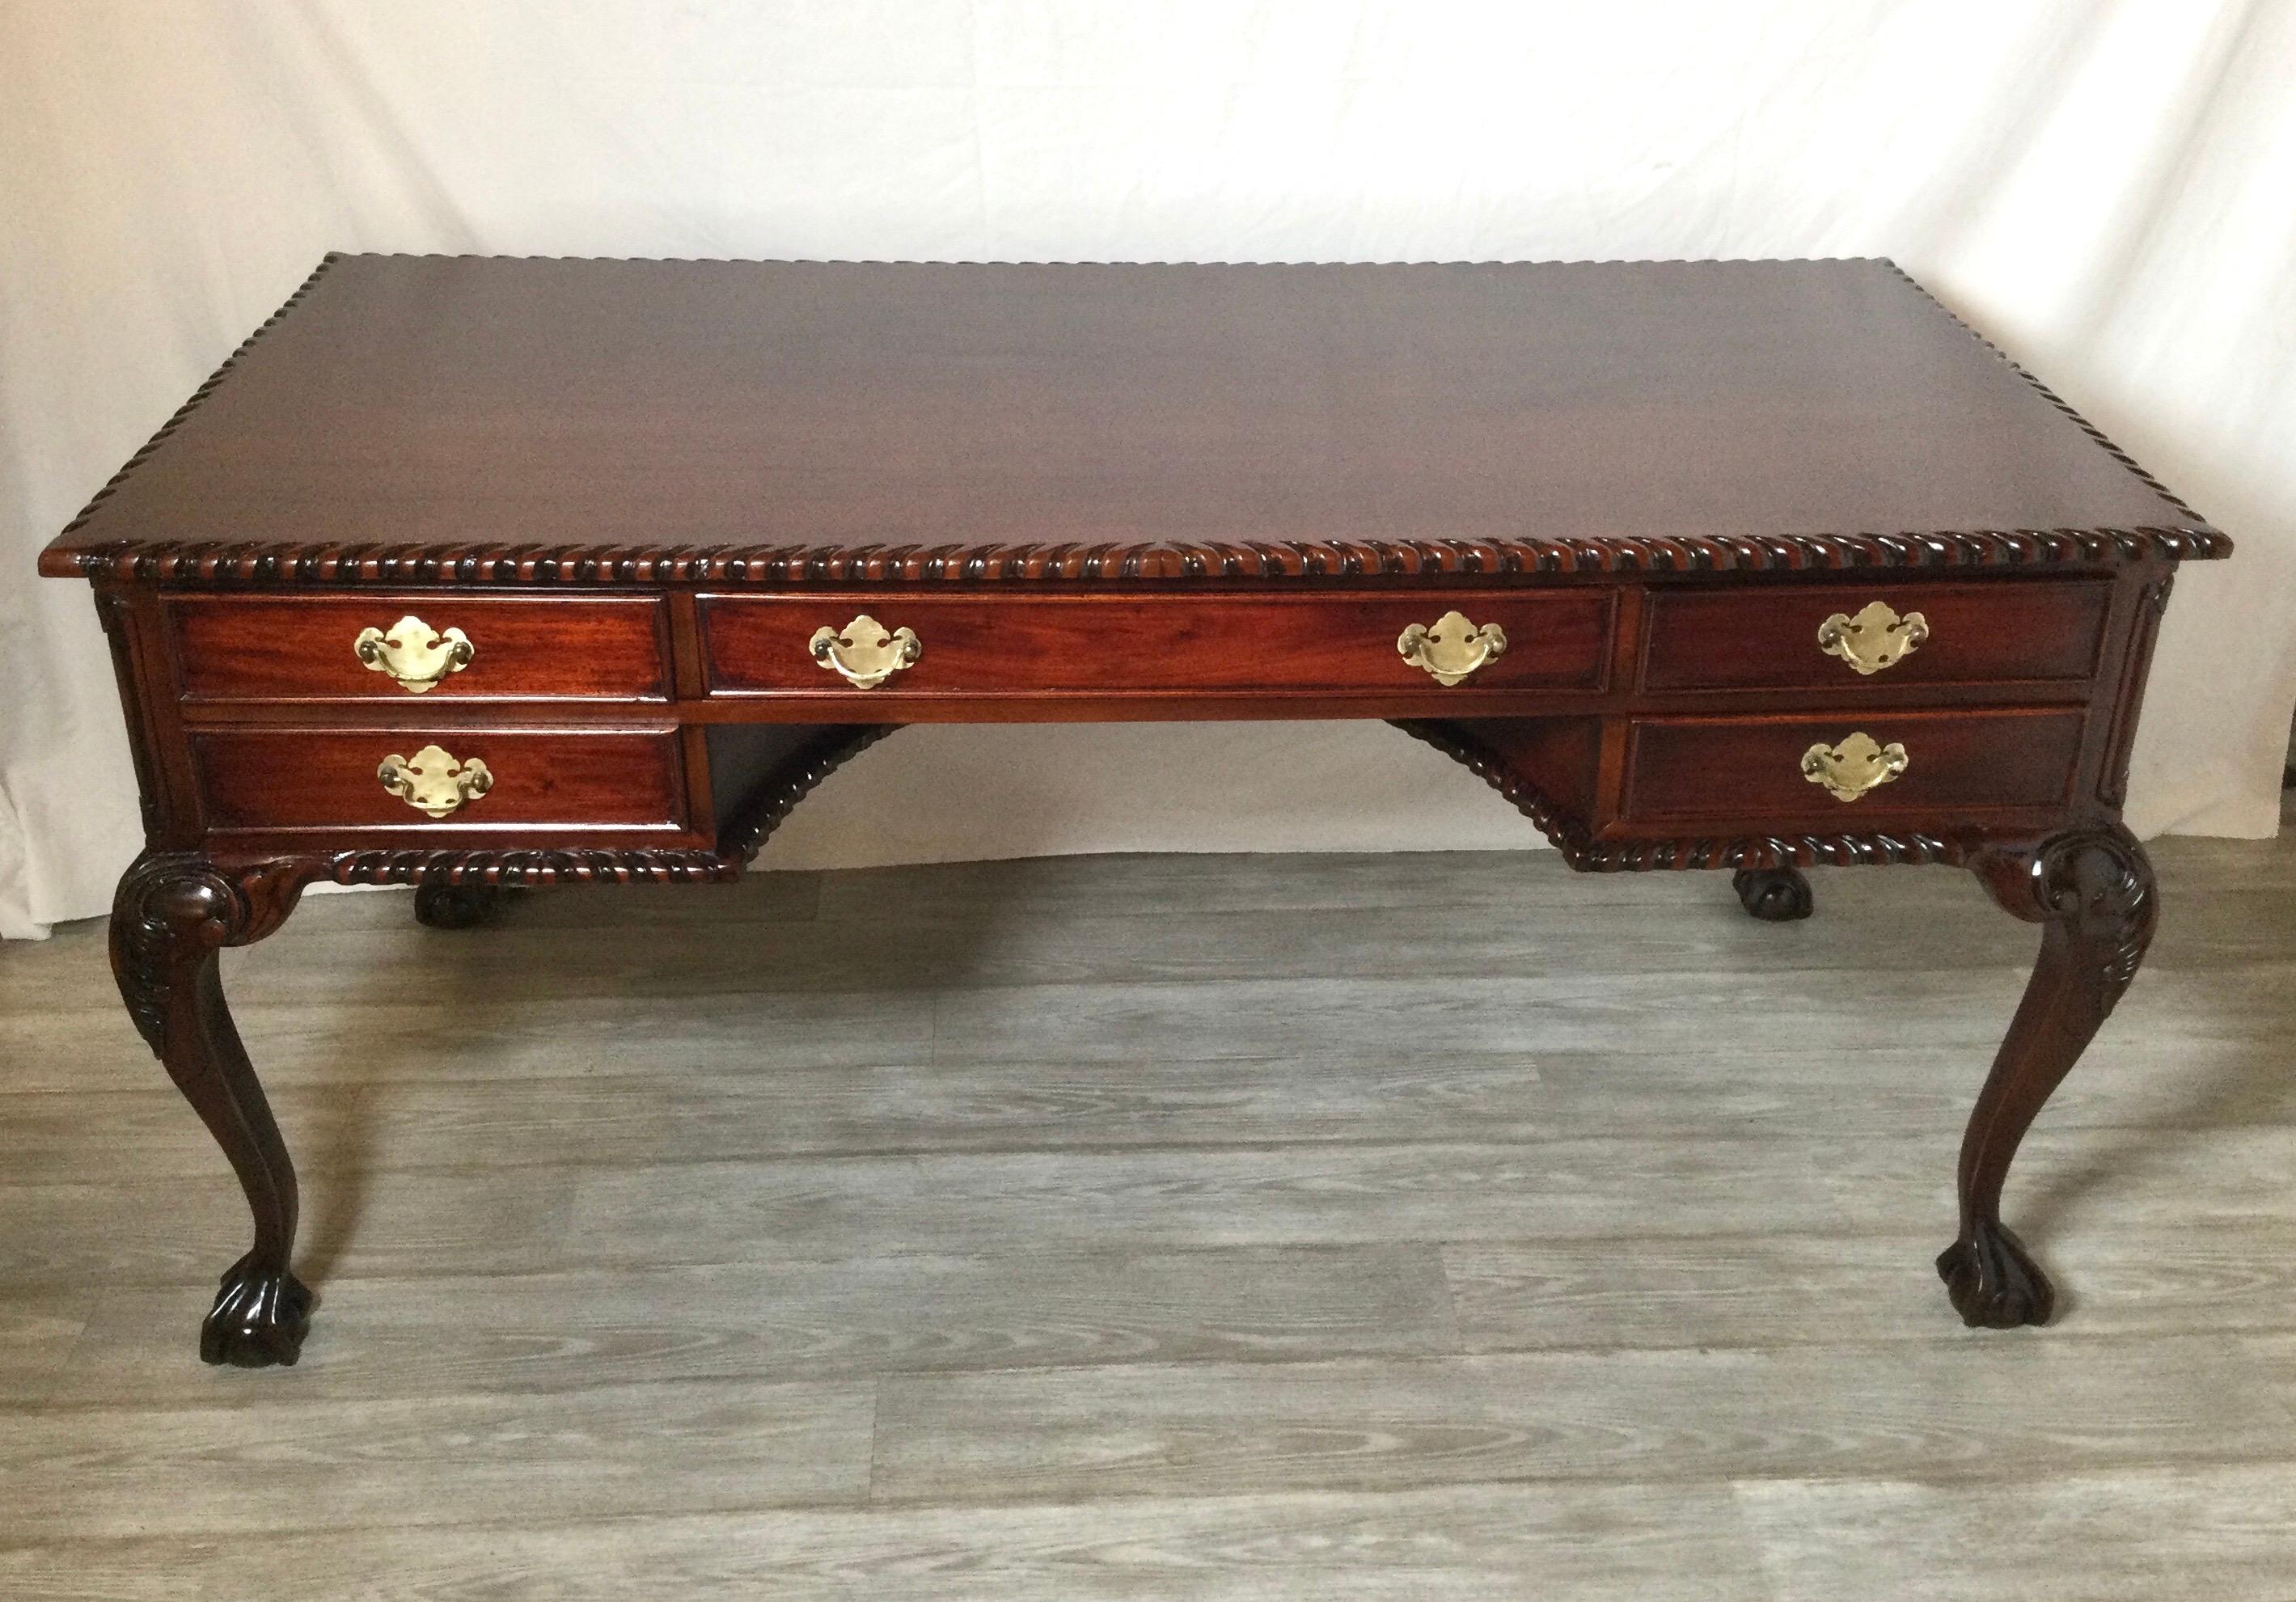 Nice sized hand carved mahogany writing desk with ball and claw feet and gadrooned edges. The rectangular surface with a center drawer flanked by two drawers on each side. The cabriole legs with carved details on the knees.
Dimensions; 64'W X 32